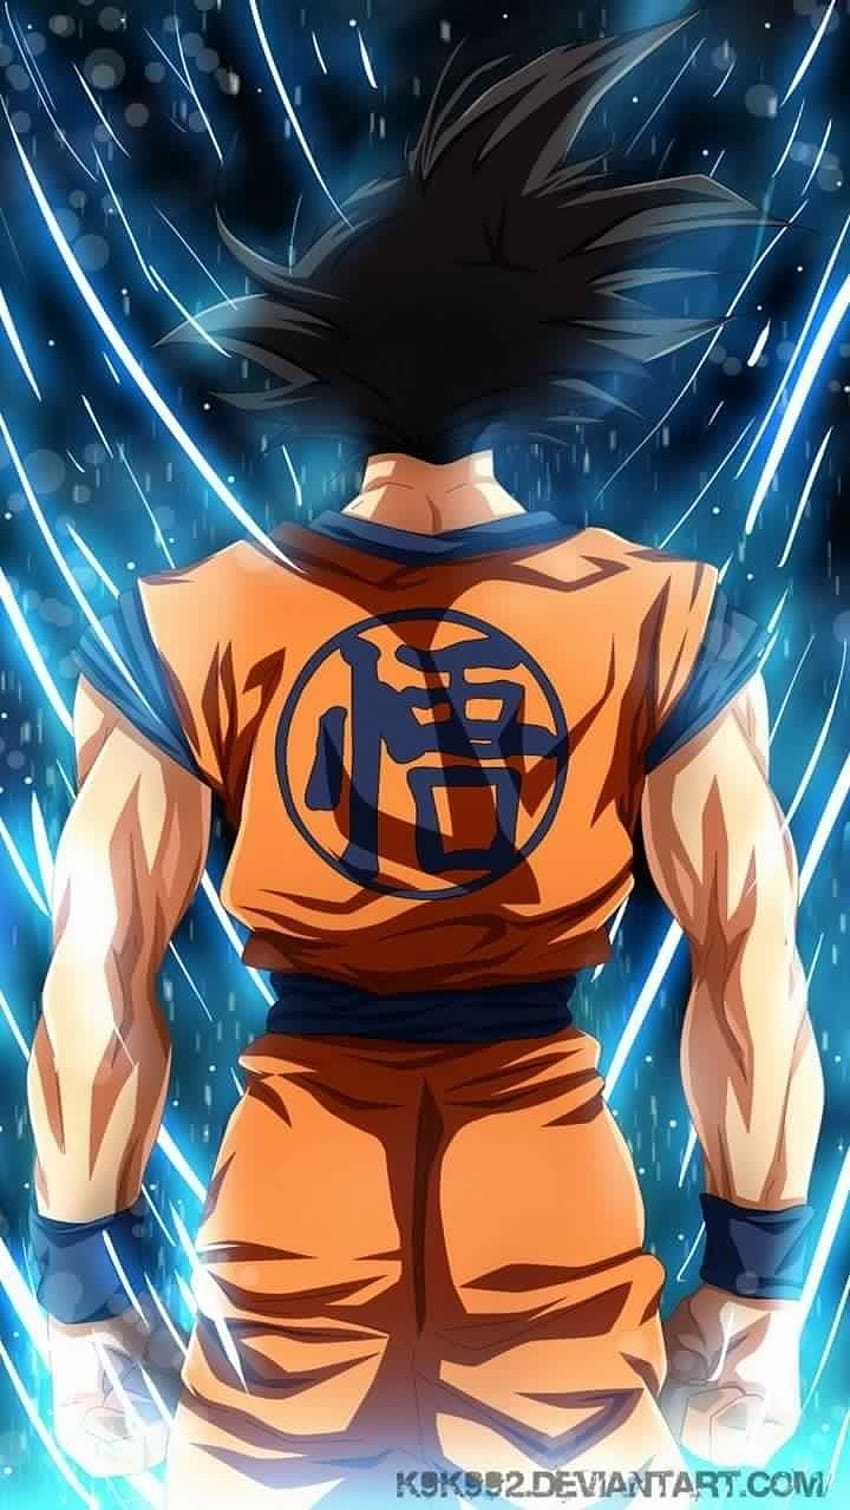 Dragon Ball Z Iphone posted by Christopher Peltier, dragon ball realistic iphone HD phone wallpaper